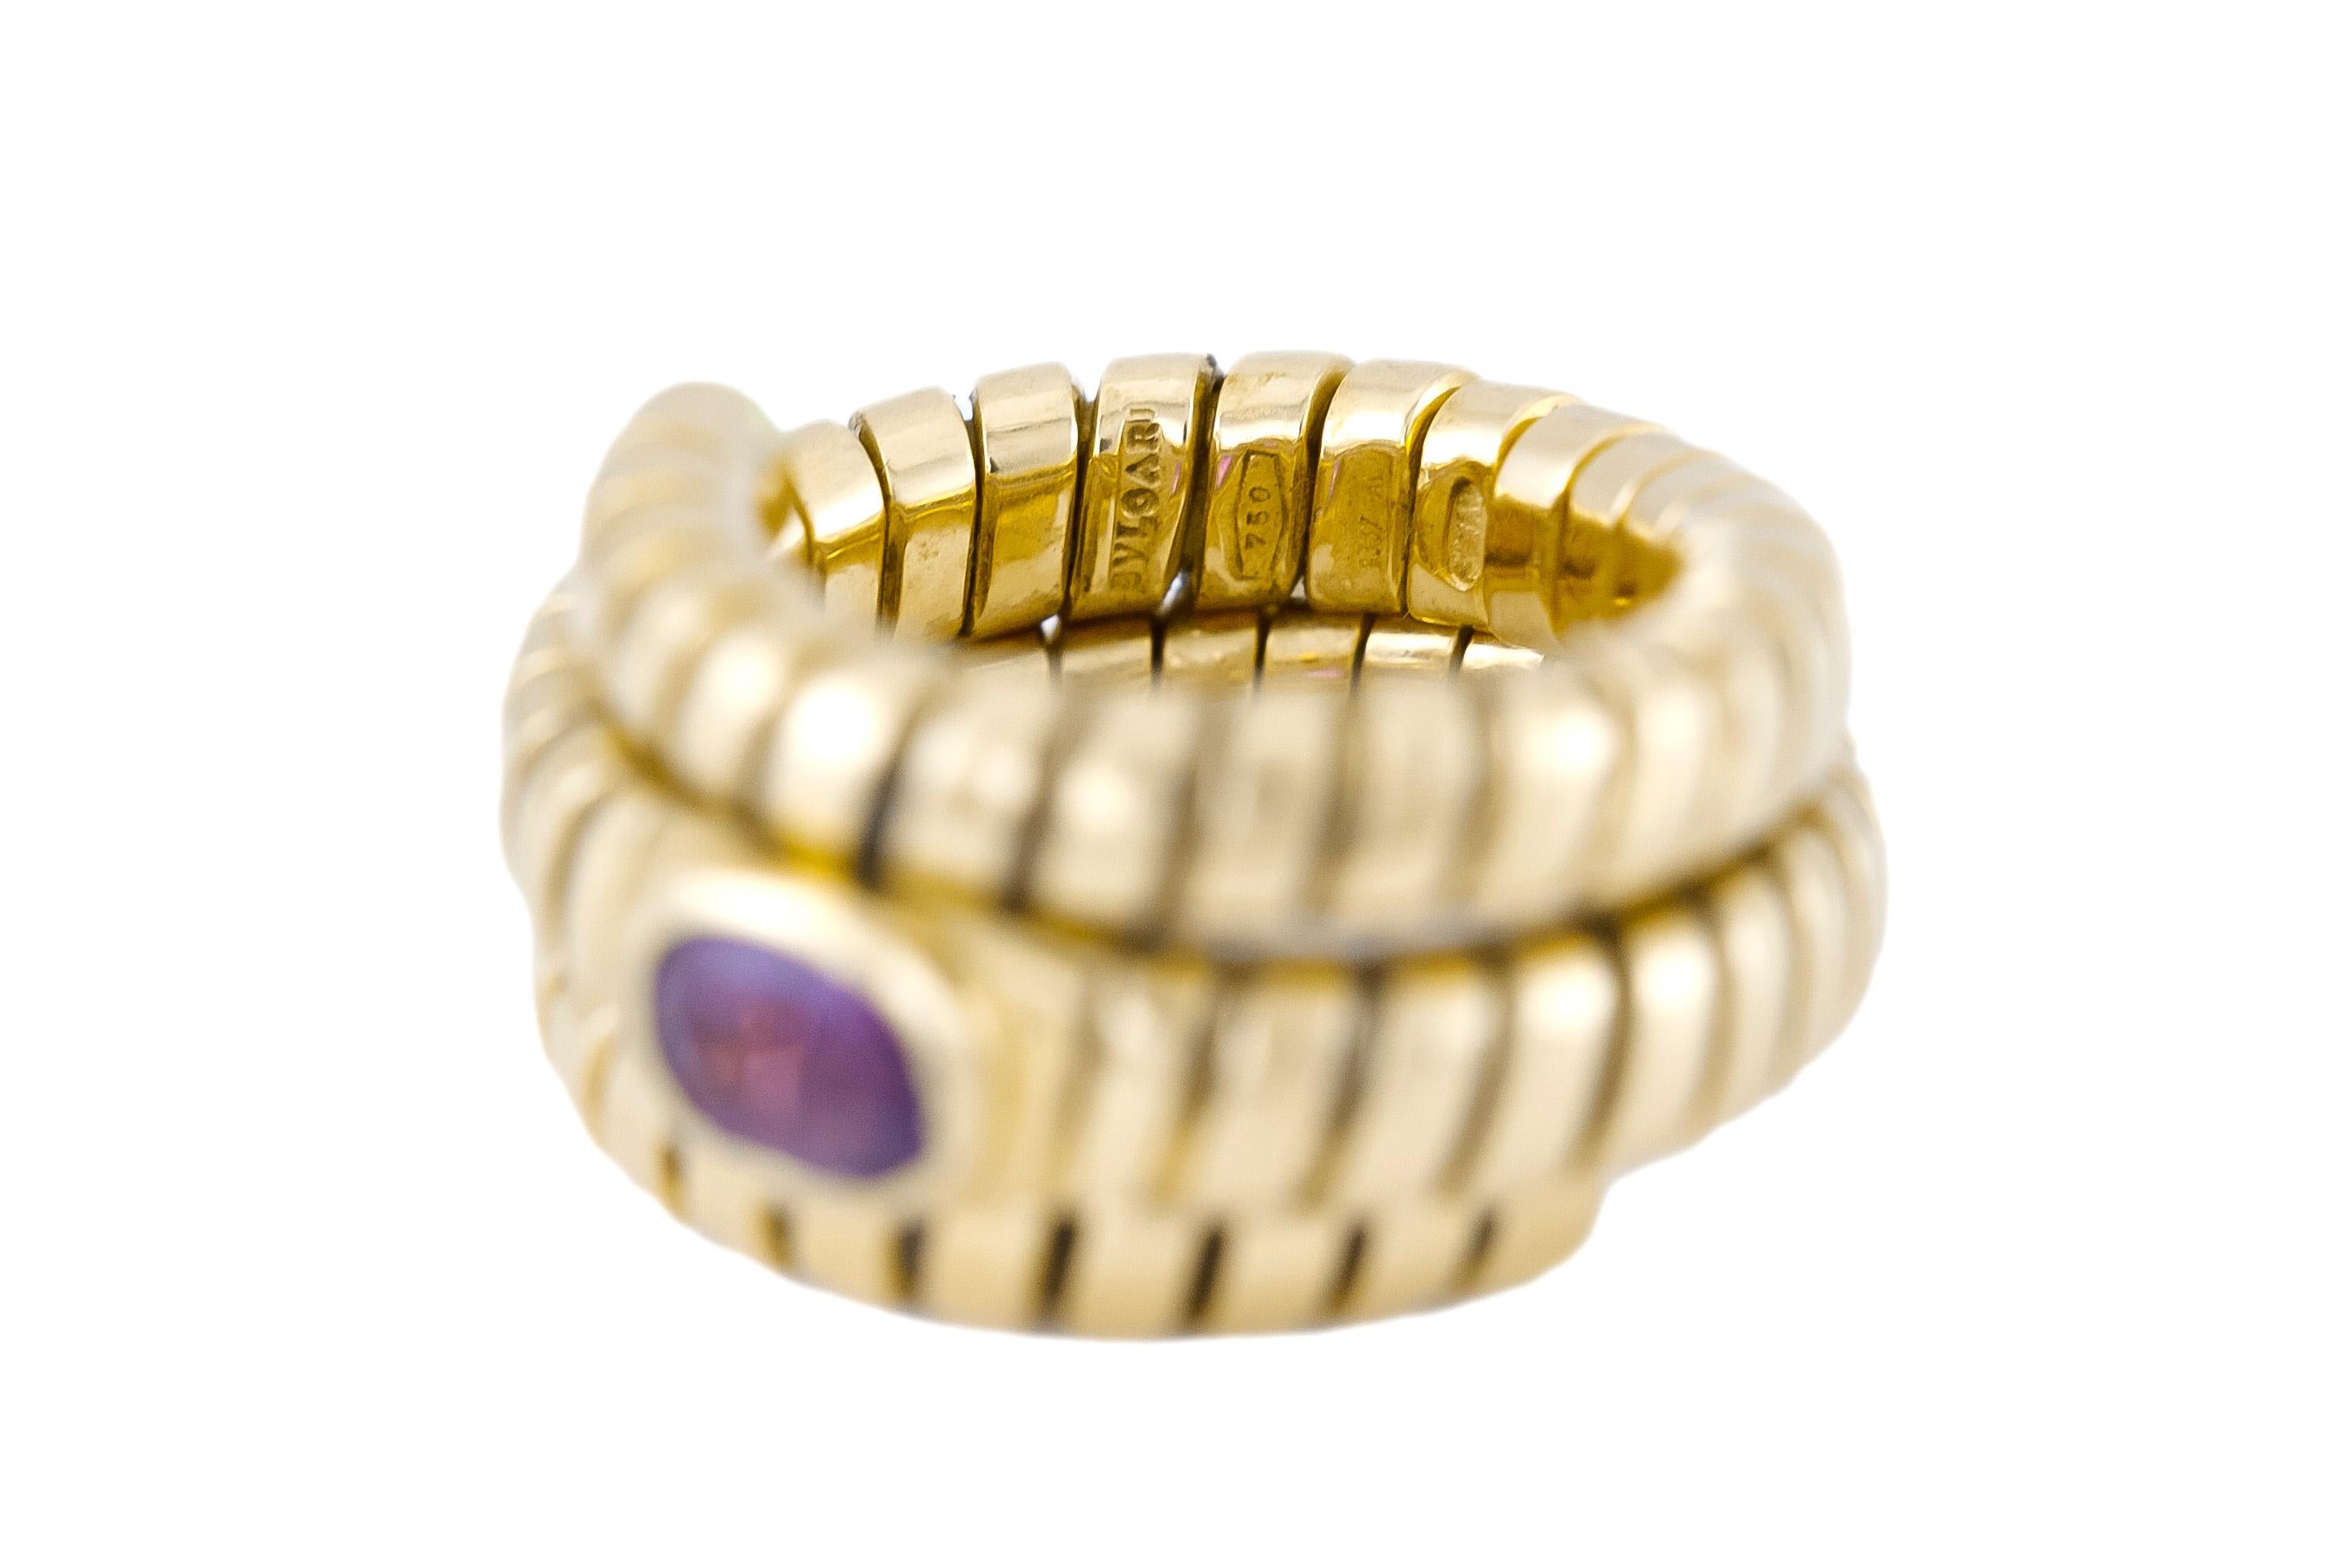 The ring is finely crafted in 18k yellow gold with one amethyst weighing approximately total of 0.80 carat.
Signed by Bvlgari.